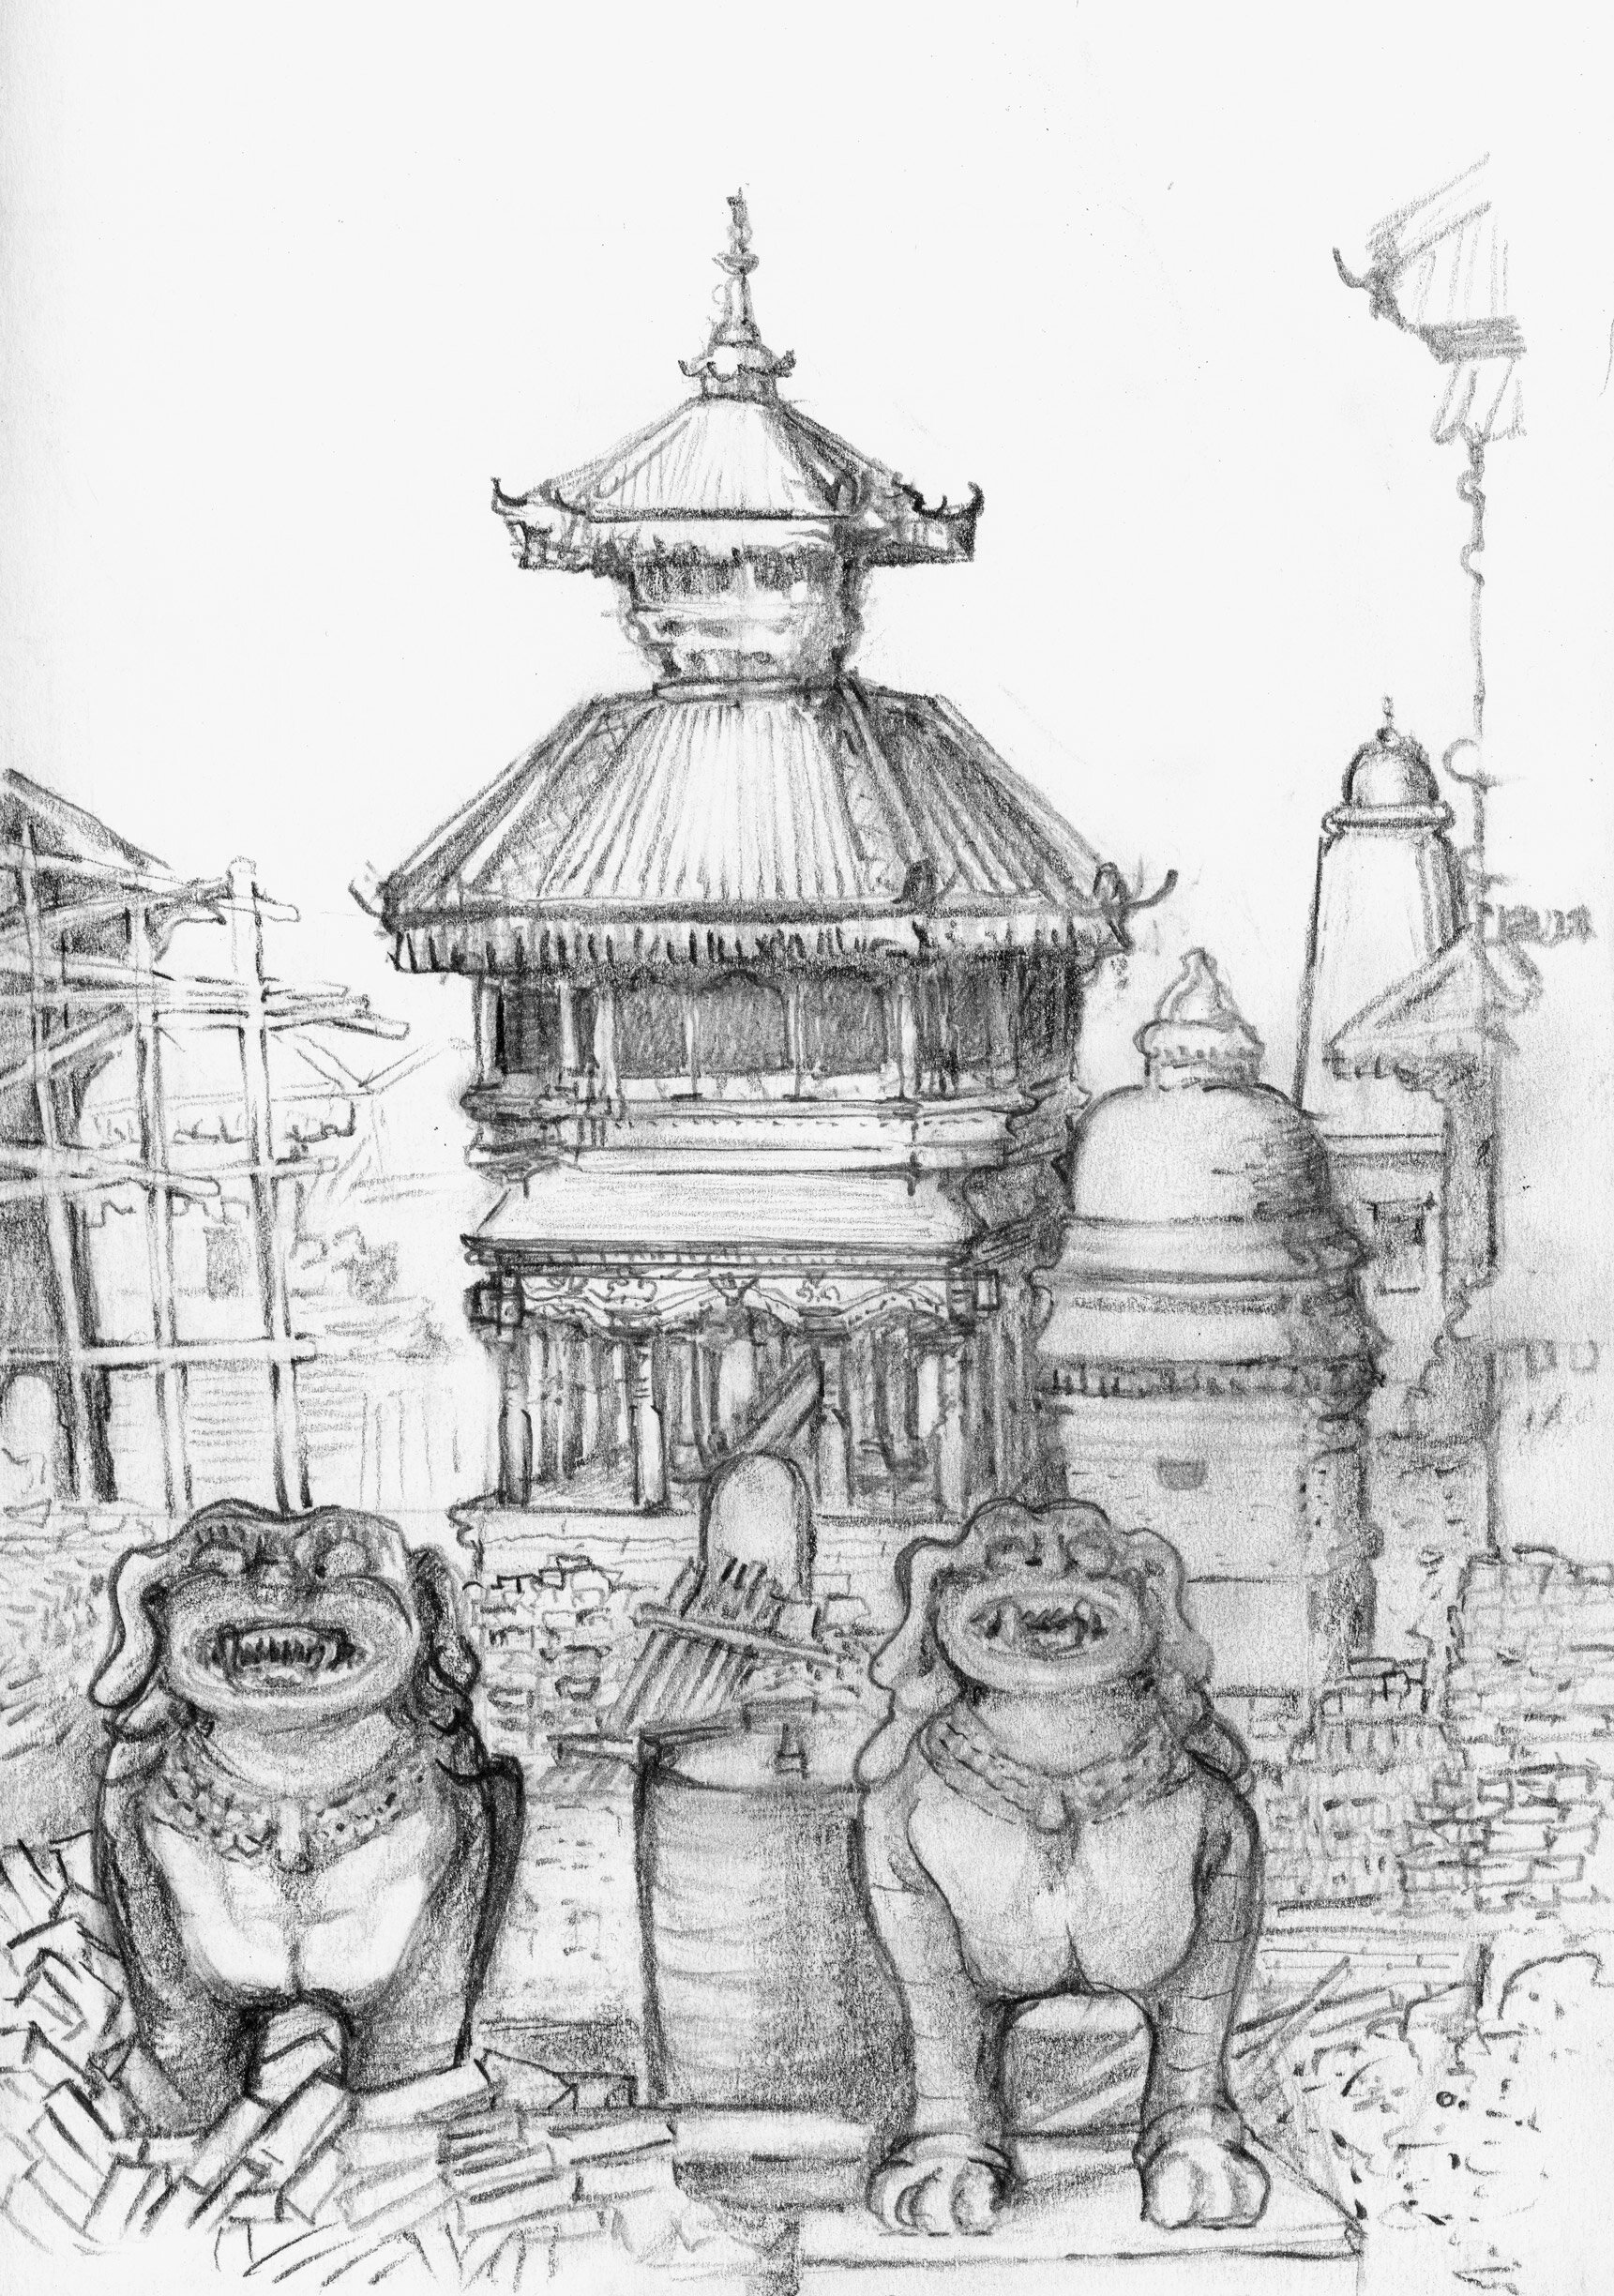   Bhaktapur Nepal Reconstruction Area with Stone Lions  2017 Pencil on paper 8x5.5 inches 